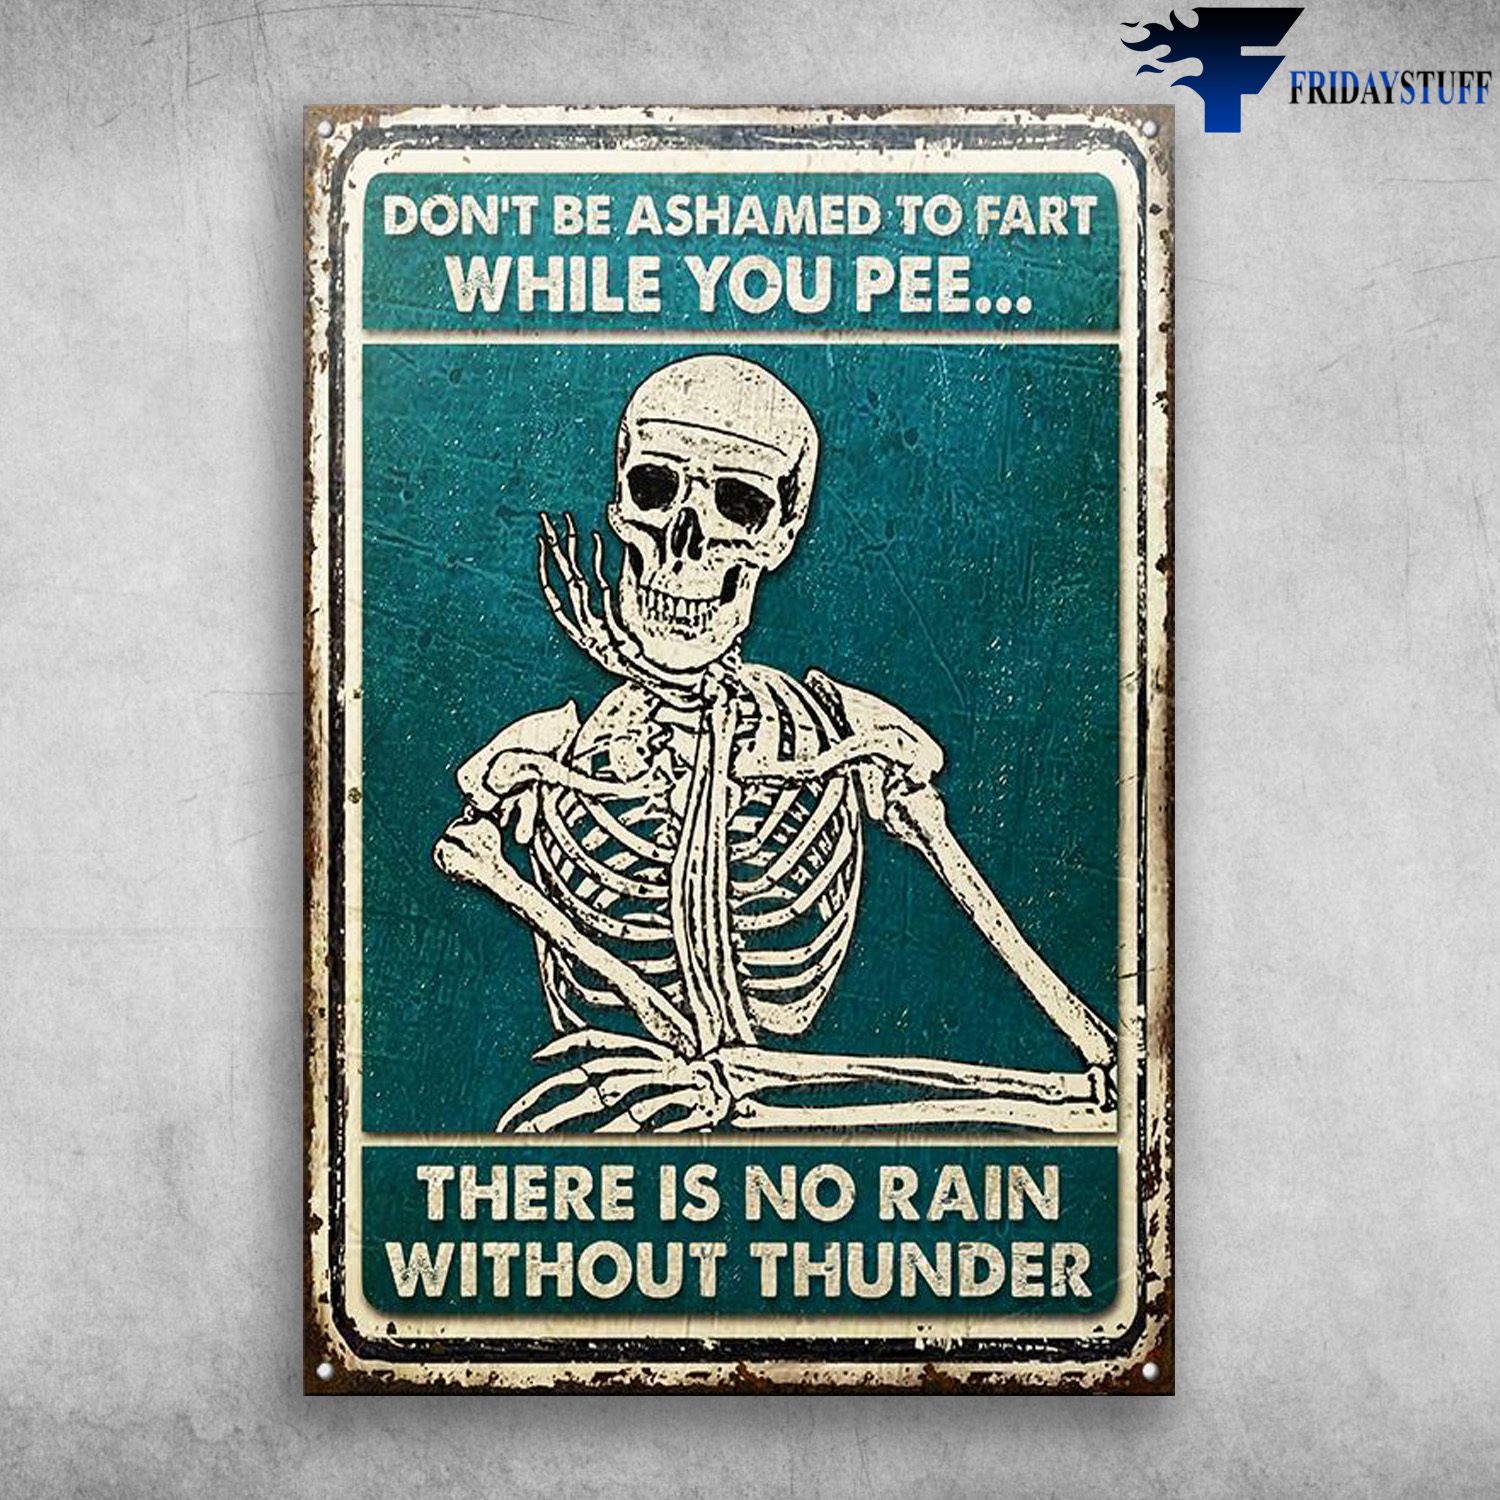 Skeleton Thinking - Don't Be Ashamed To Fast, While You Pee, There Is No Rain Without Thunder